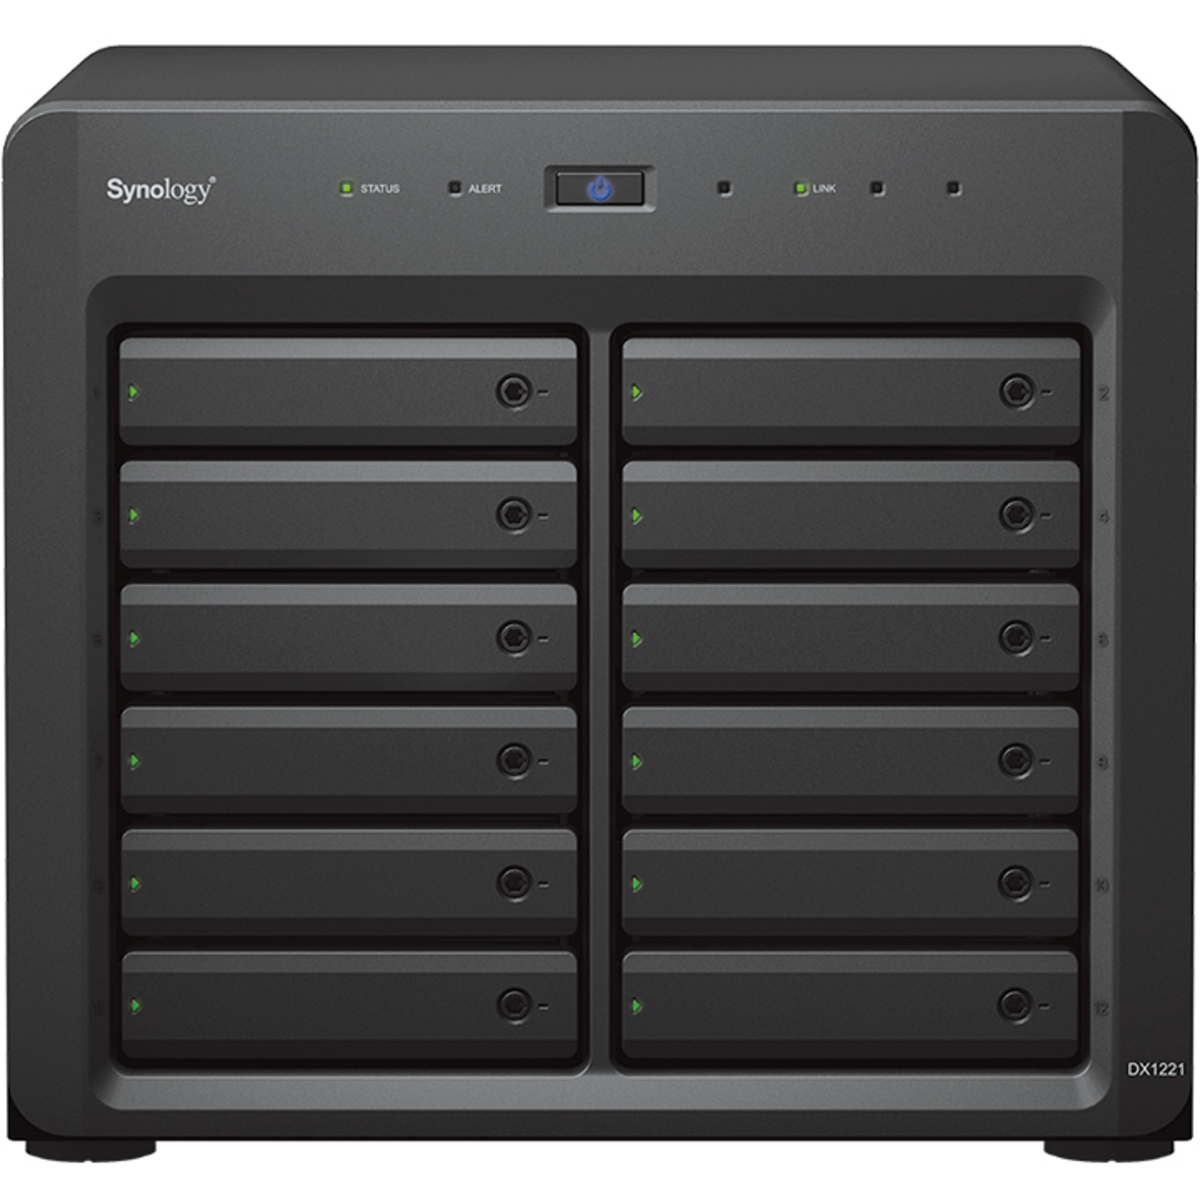 Synology DX1222 External Expansion Drive 80tb 12-Bay Desktop Multimedia / Power User / Business Expansion Enclosure 8x10tb Western Digital Red Plus WD101EFBX 3.5 7200rpm SATA 6Gb/s HDD NAS Class Drives Installed - Burn-In Tested DX1222 External Expansion Drive